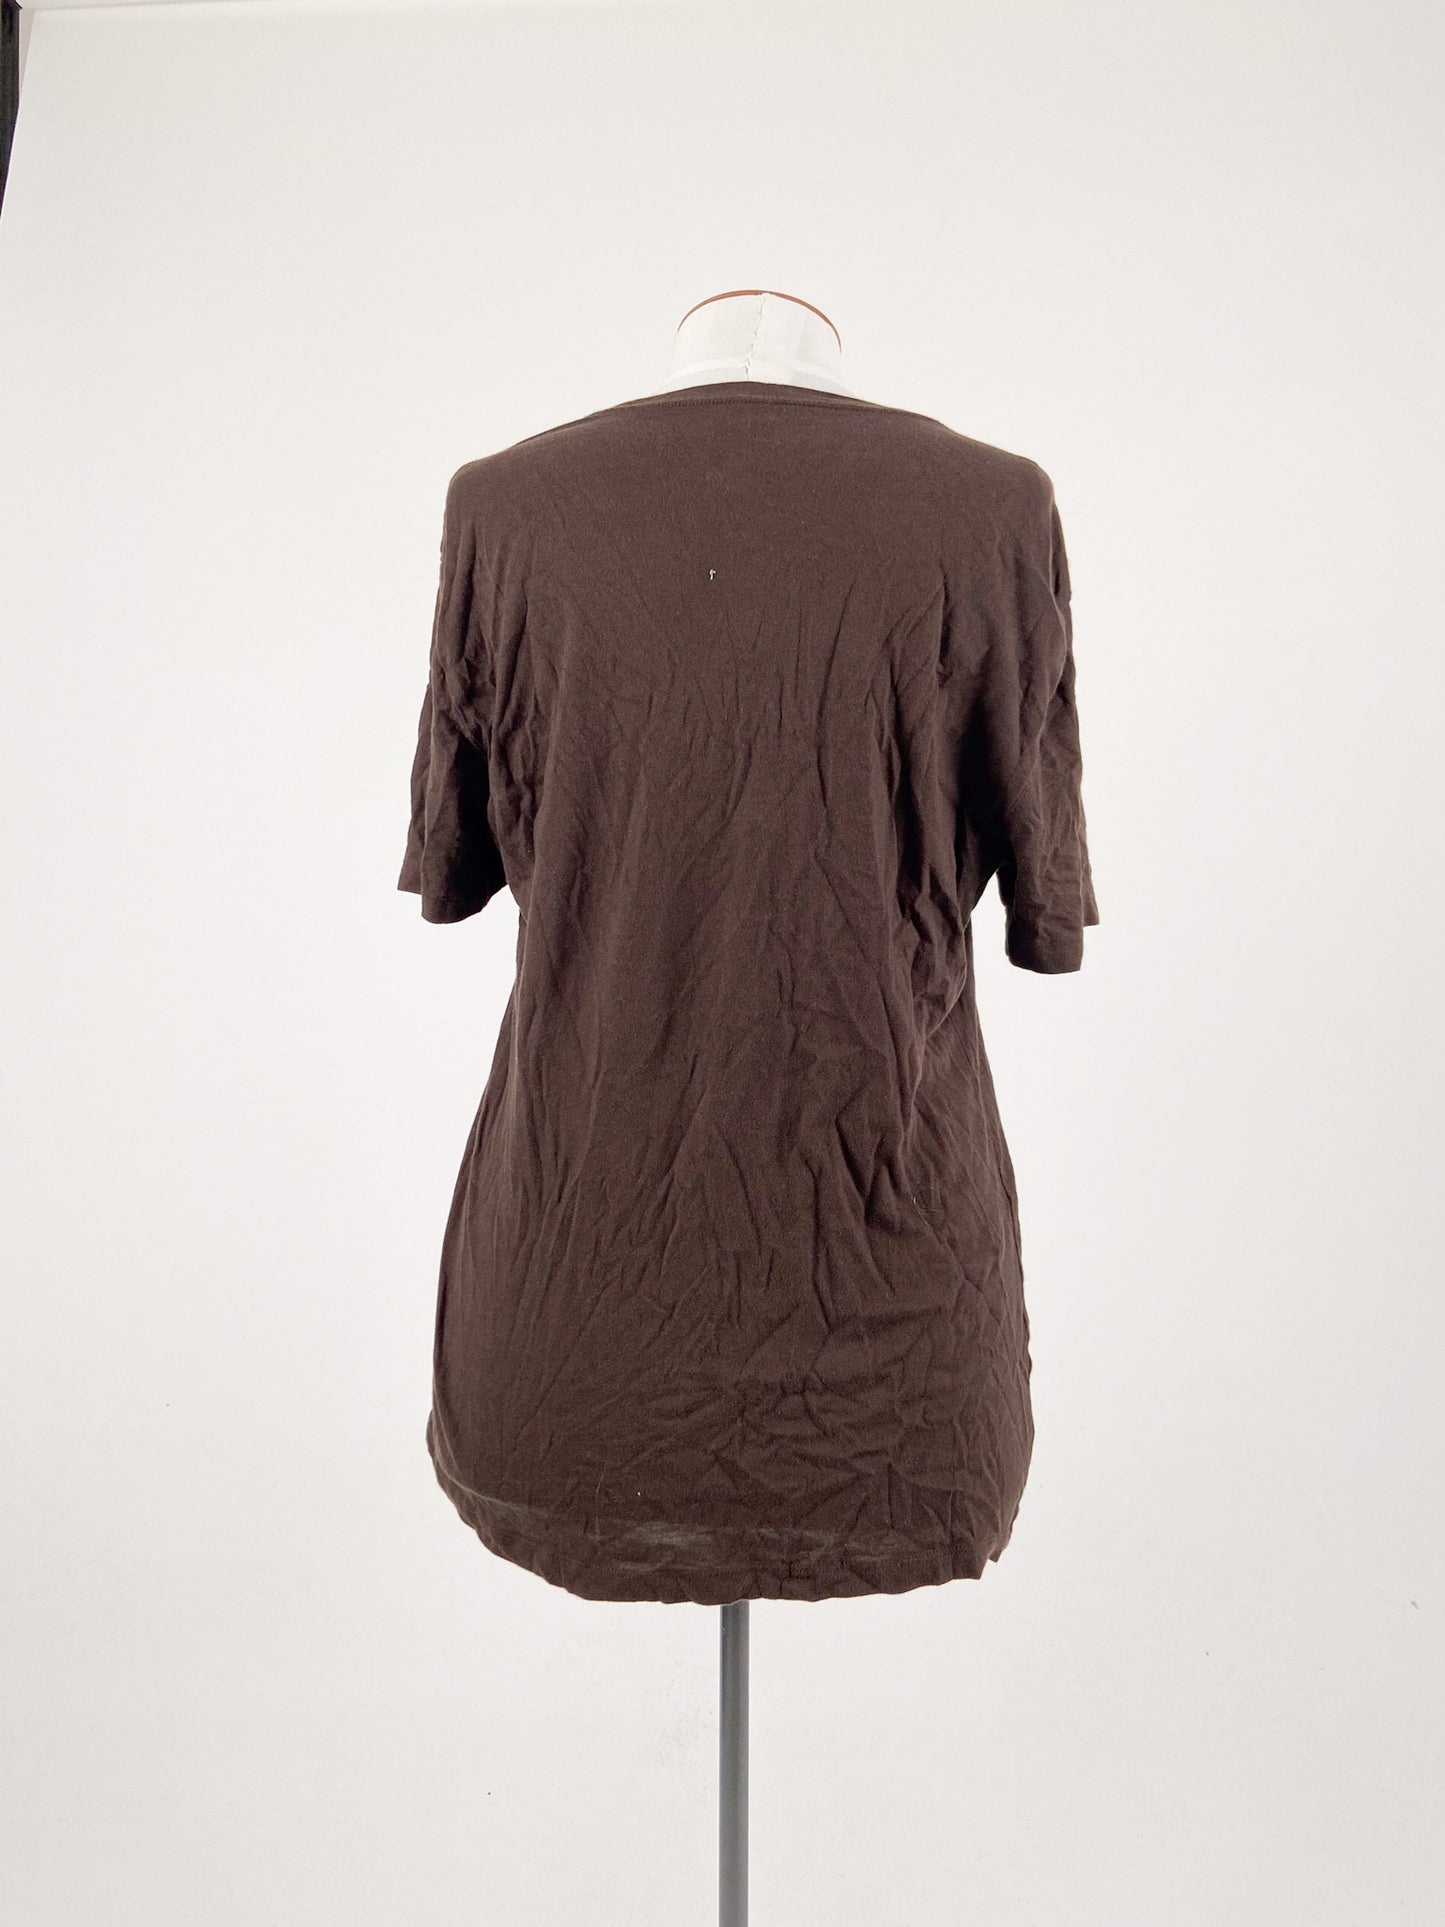 GAP | Brown Casual Top | Size M